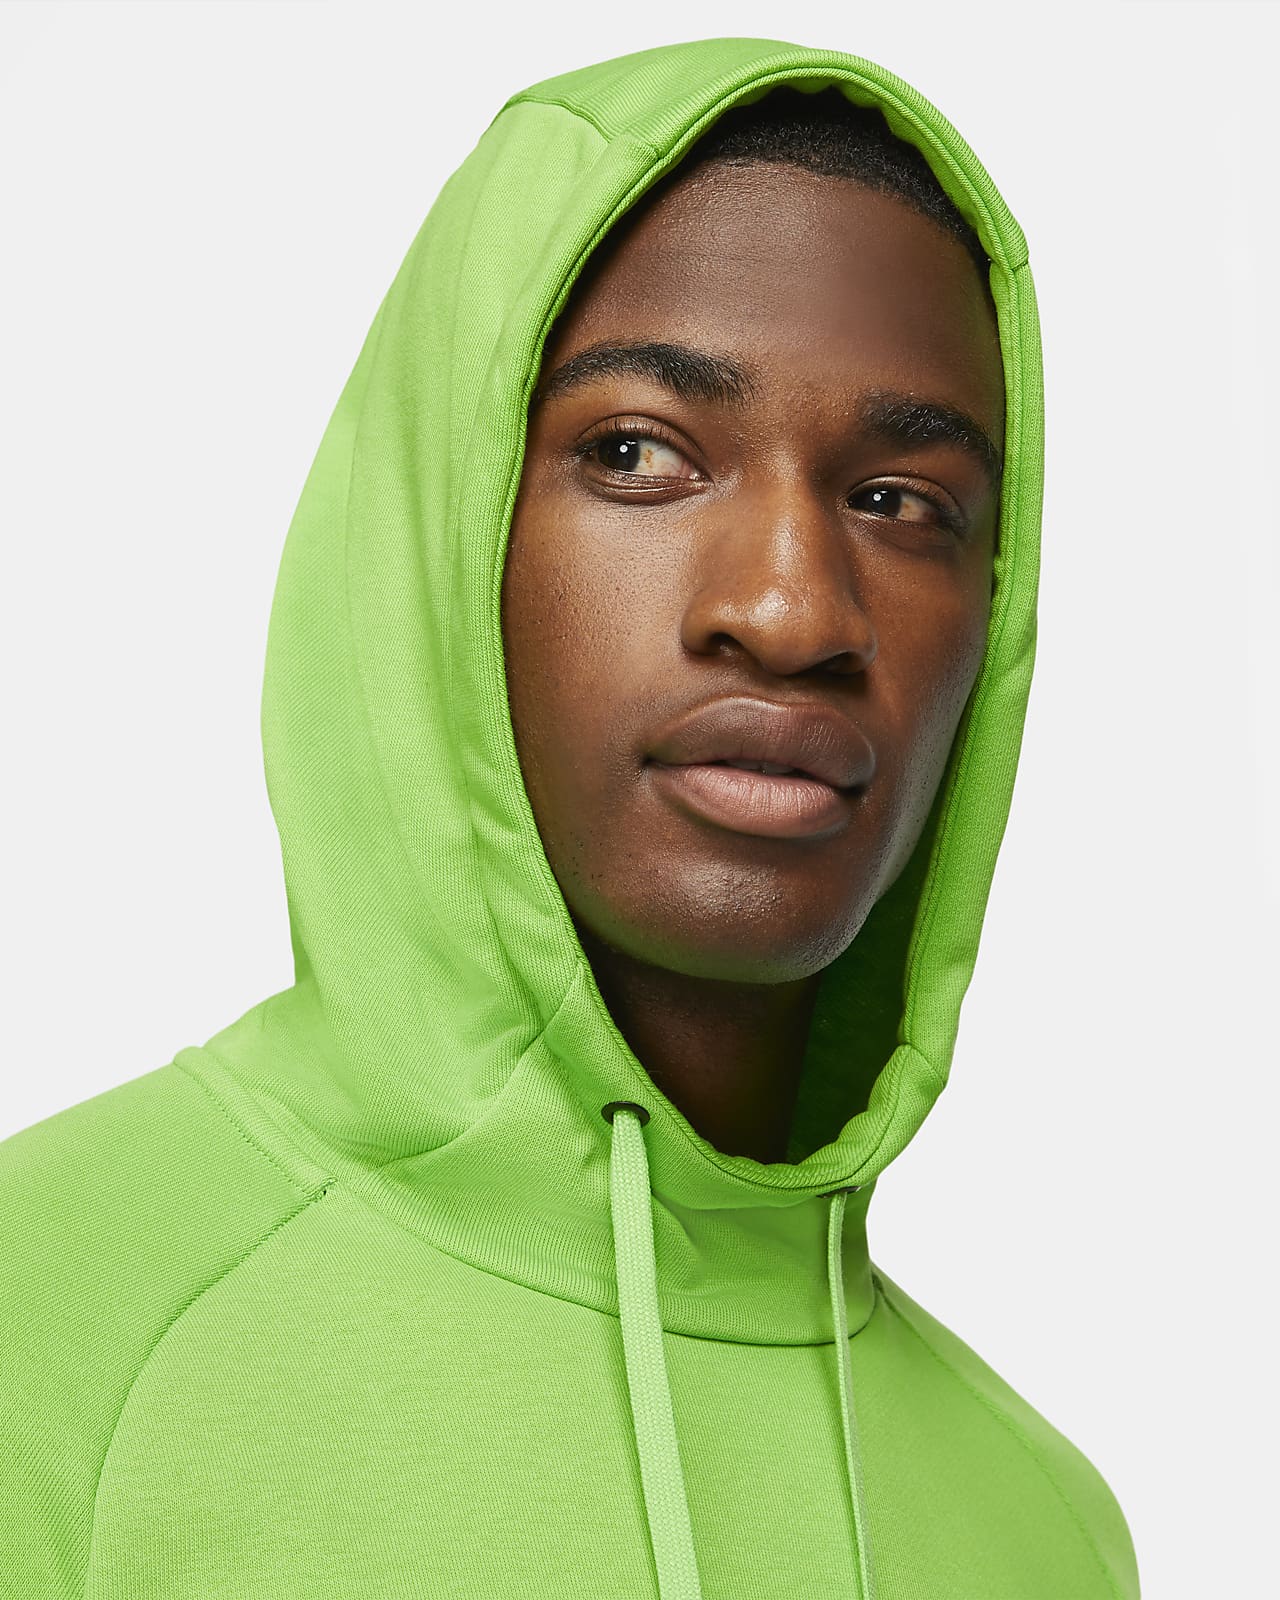 nike green pullover